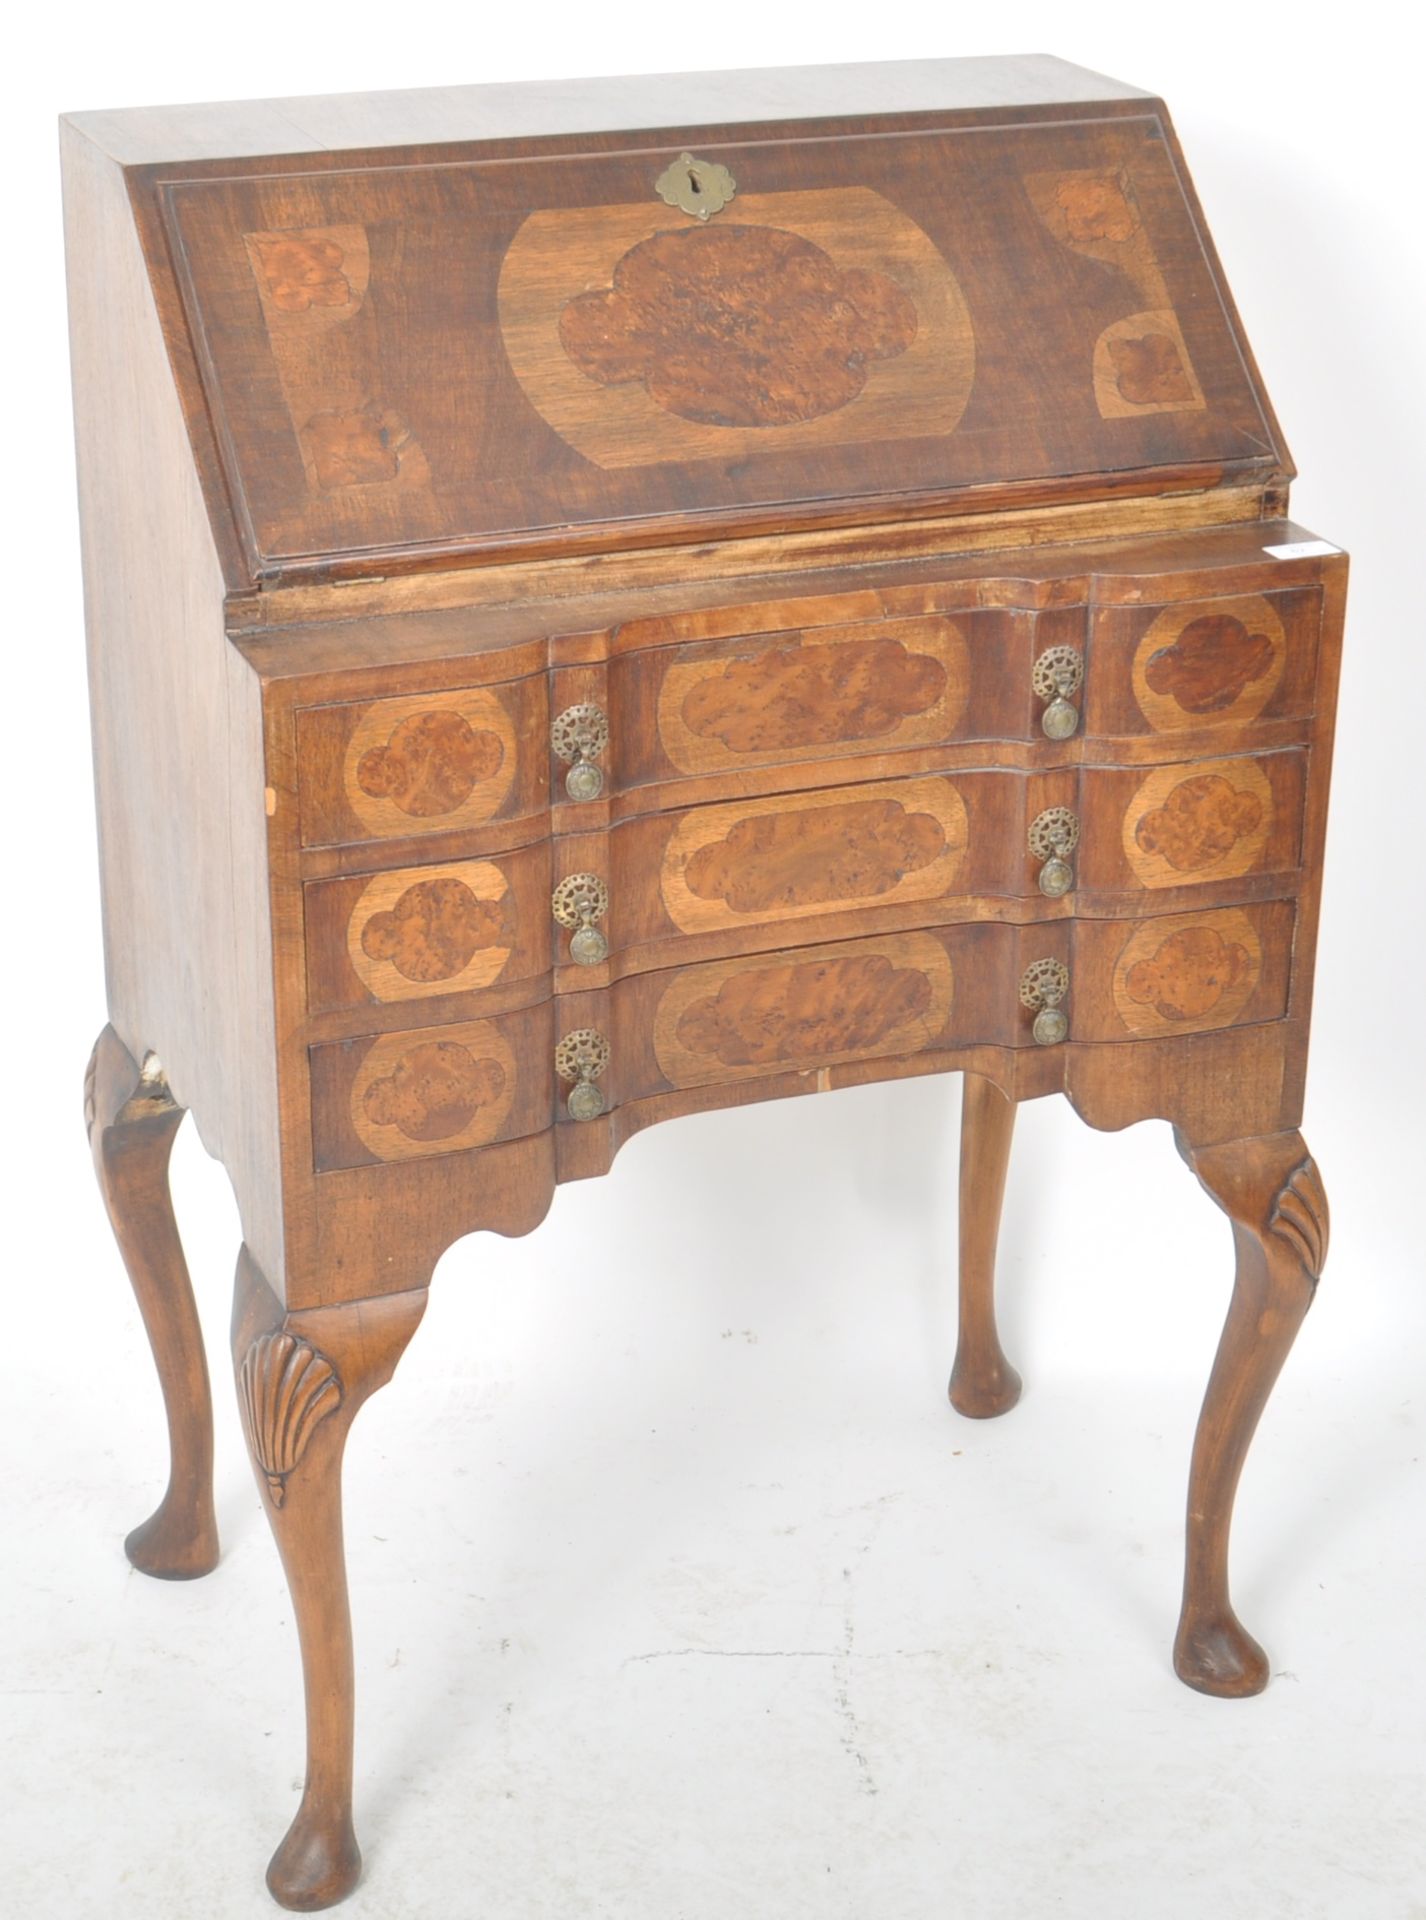 EARLY 20TH CENTURY QUEEN ANNE STYLE WALNUT BUREAU - Image 2 of 7